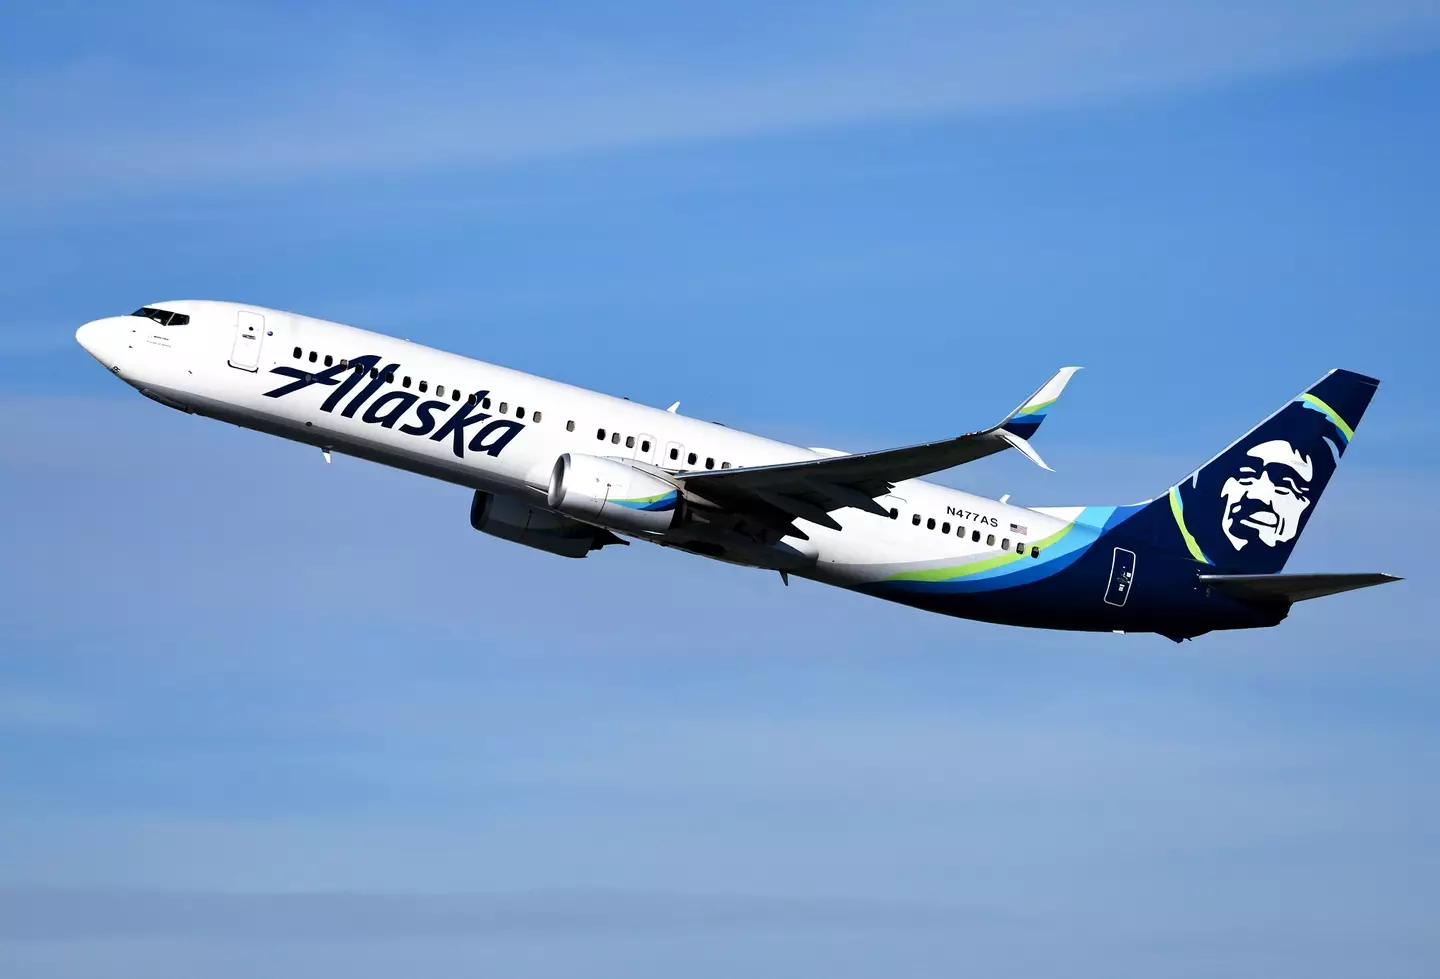 The ordeal reportedly took place on an Alaska Airlines flight in 2011.